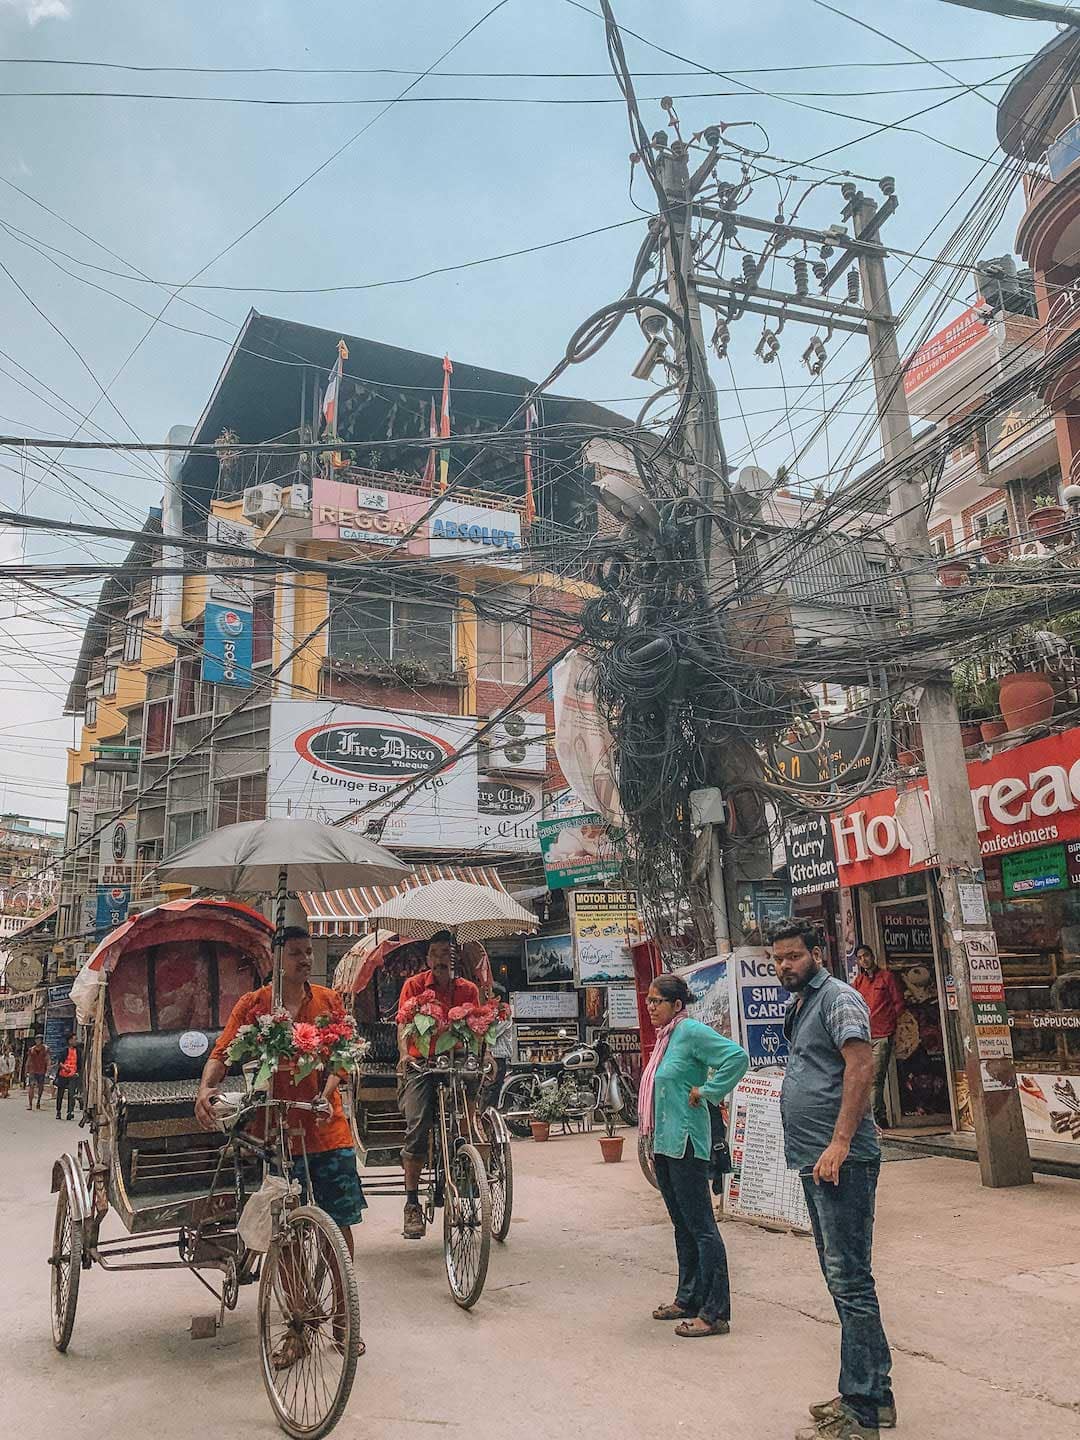 Busy street with a large knot of electrical wires. Two men on rickshaws on the road. Kathmandu Travel Guide